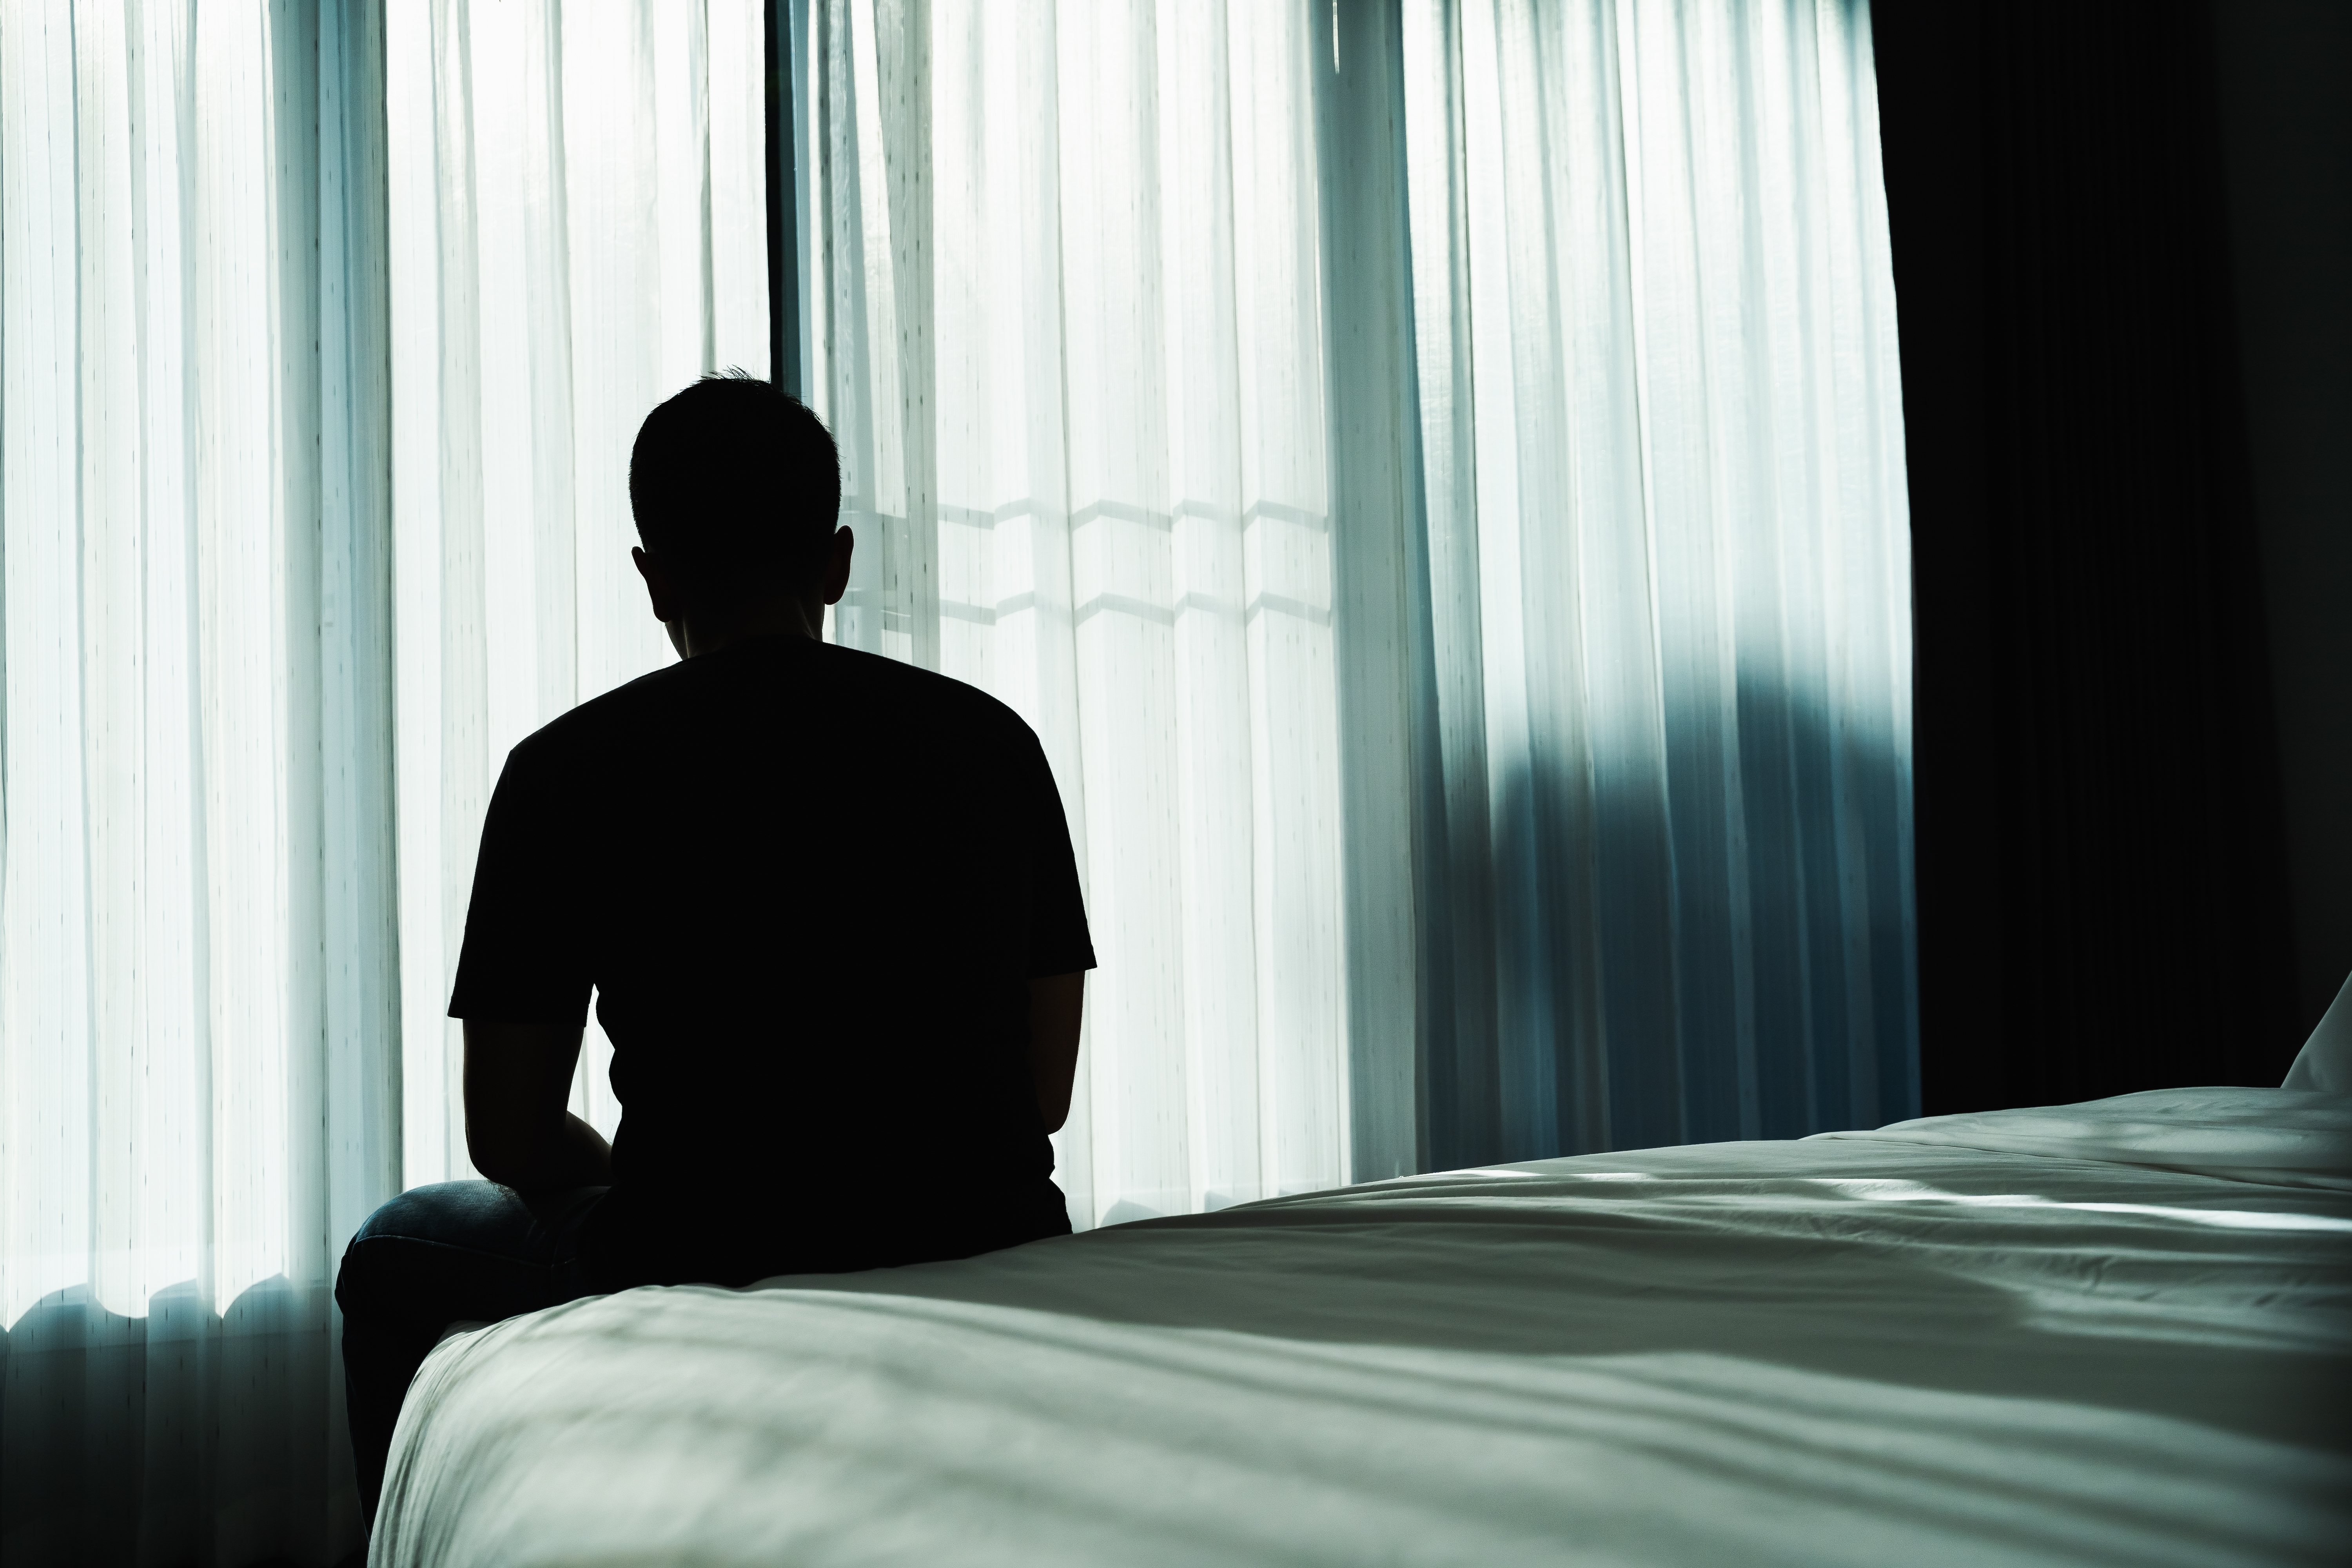 Silhouette of a man sitting on a bed | Source: Shutterstock